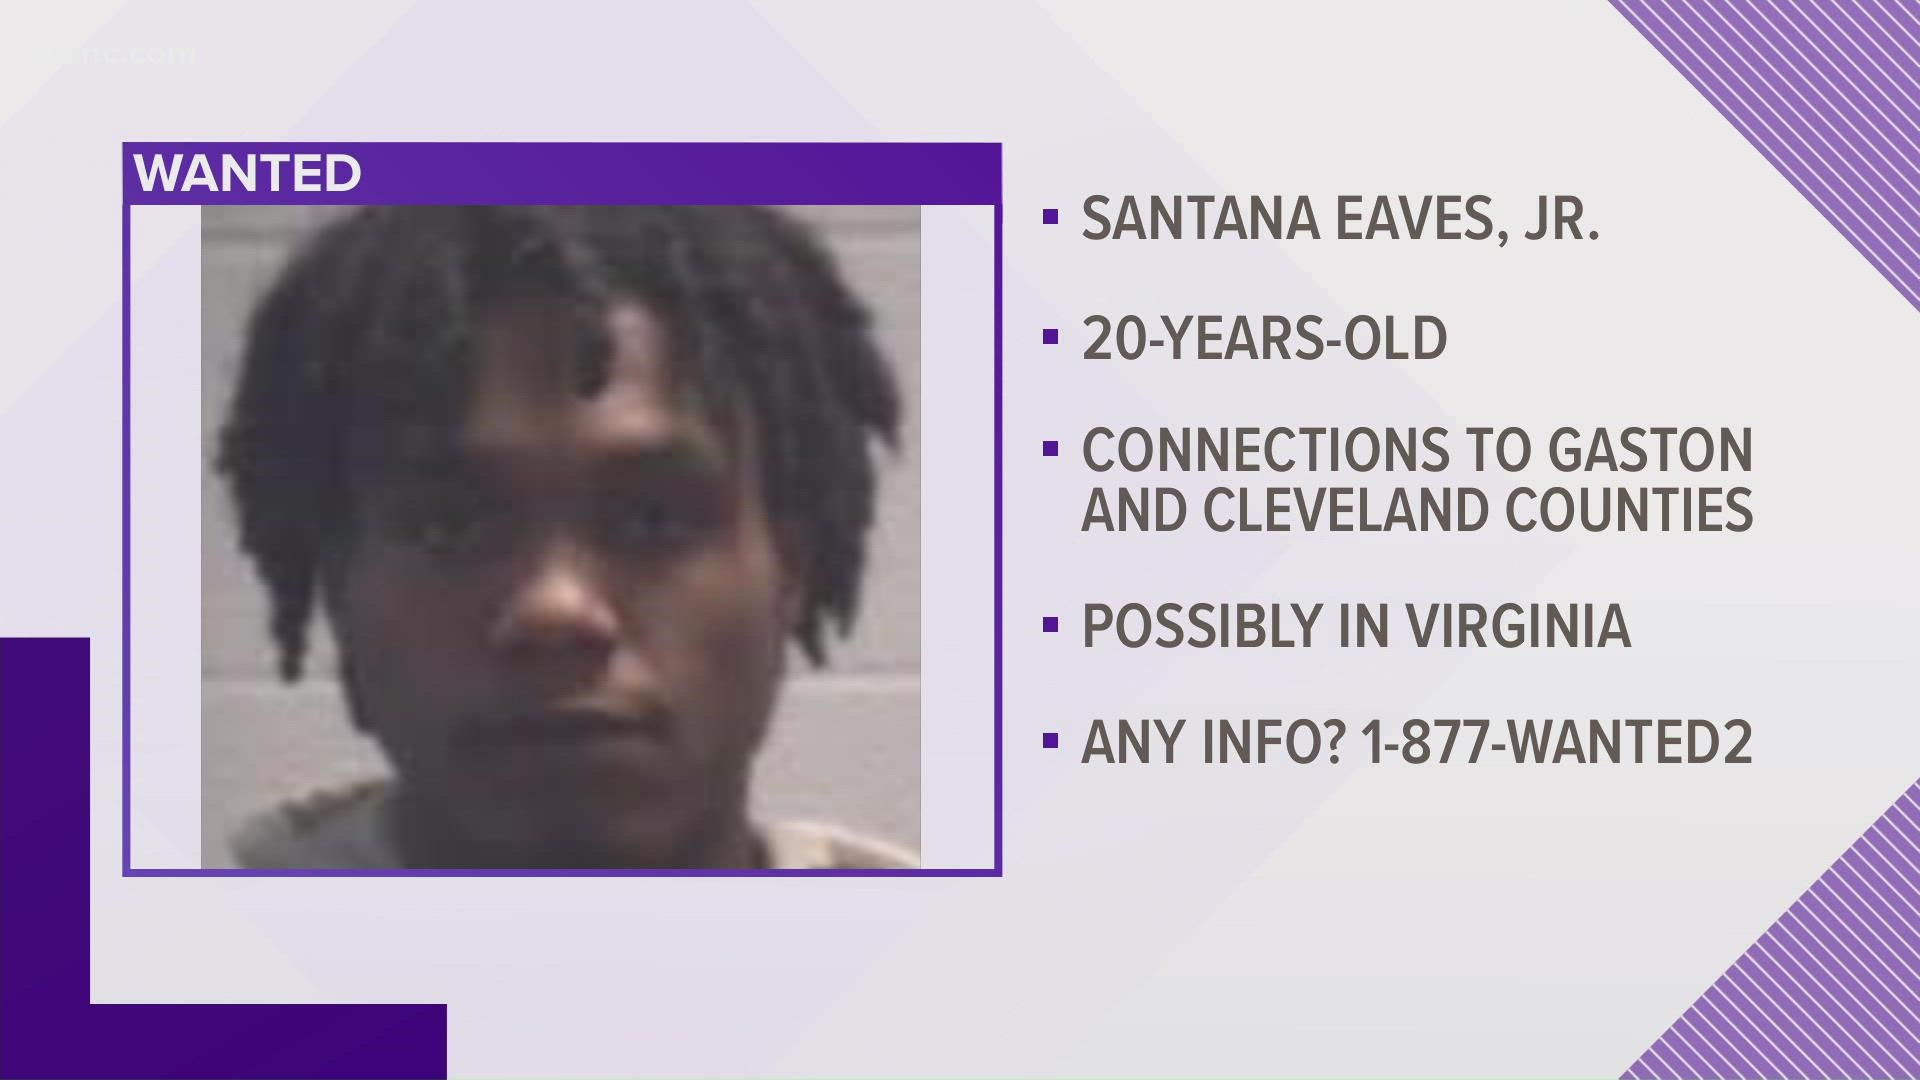 Santana Eaves Jr. is wanted for first-degree murder in connection with the killing of 16-year-old Skyteria Poston on Nov. 9.